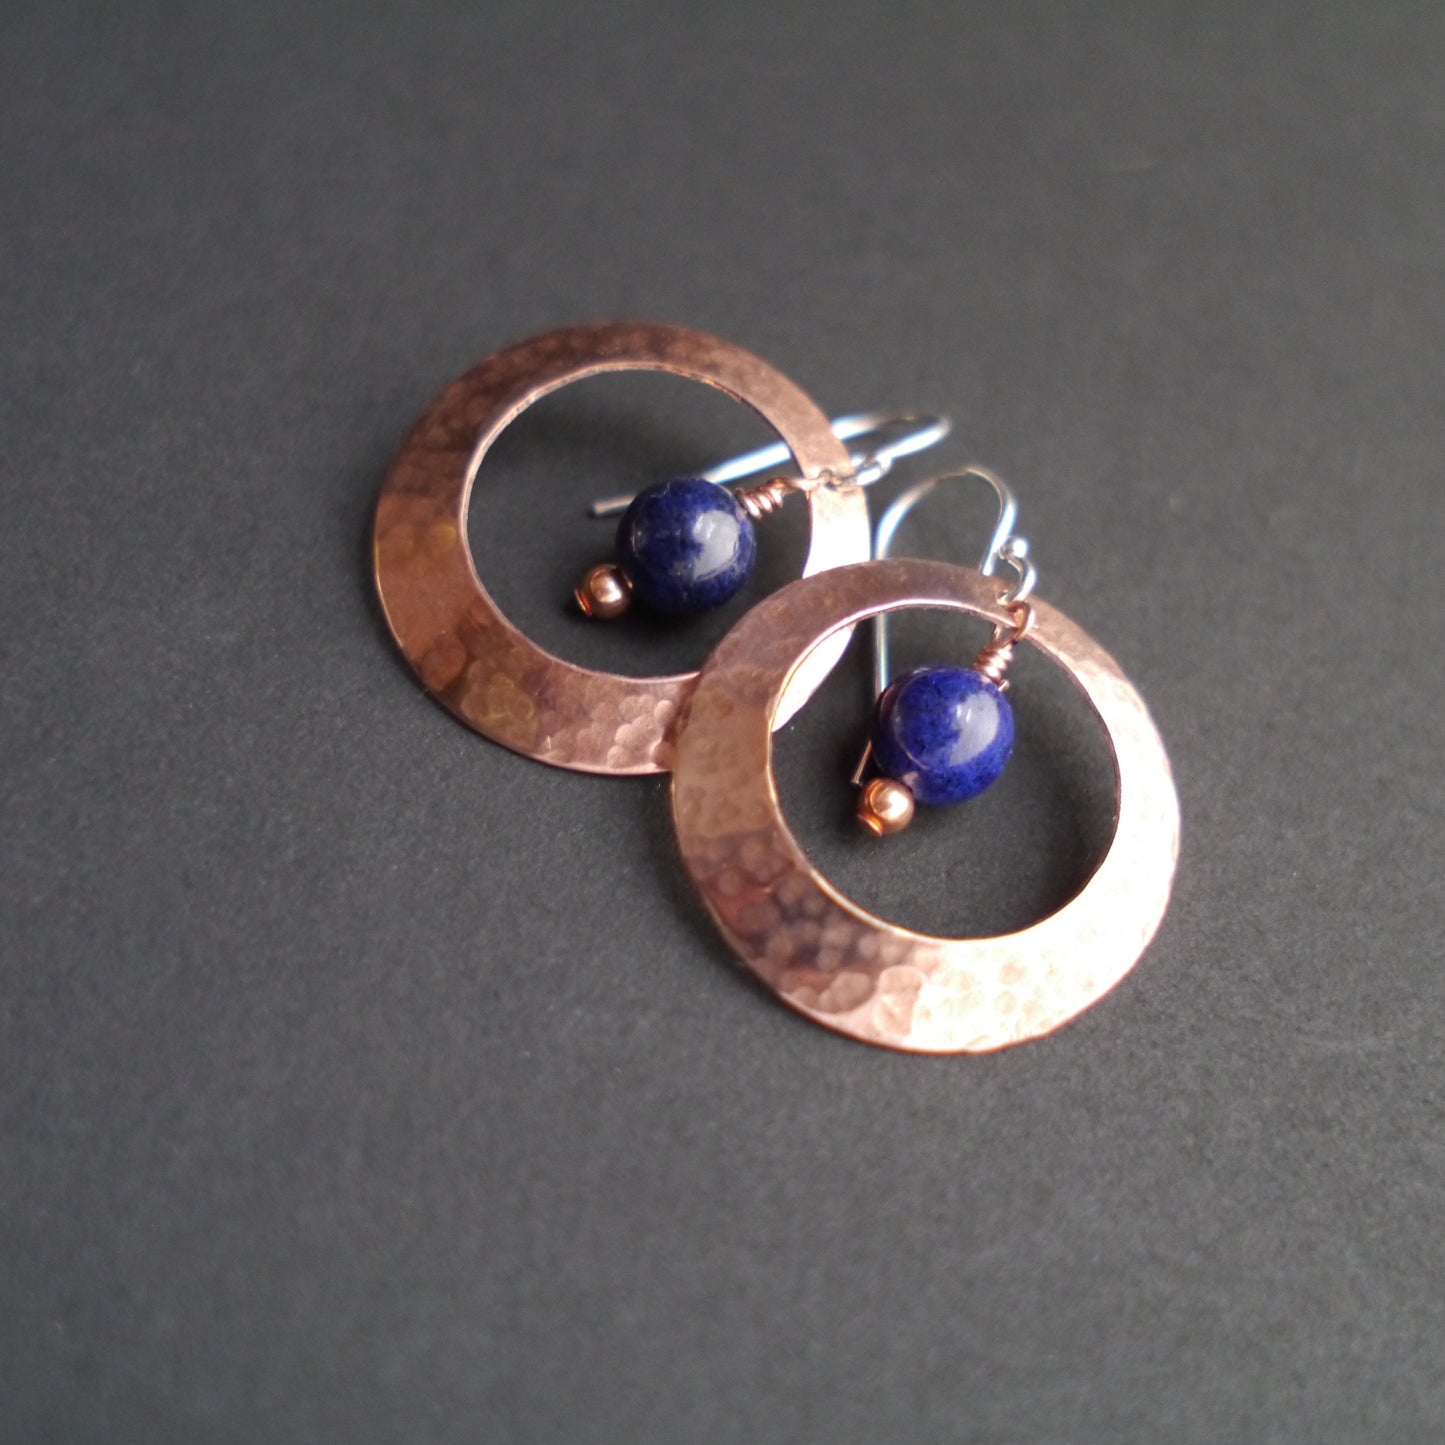 Copper Statement Earrings with Lapis Lazuli